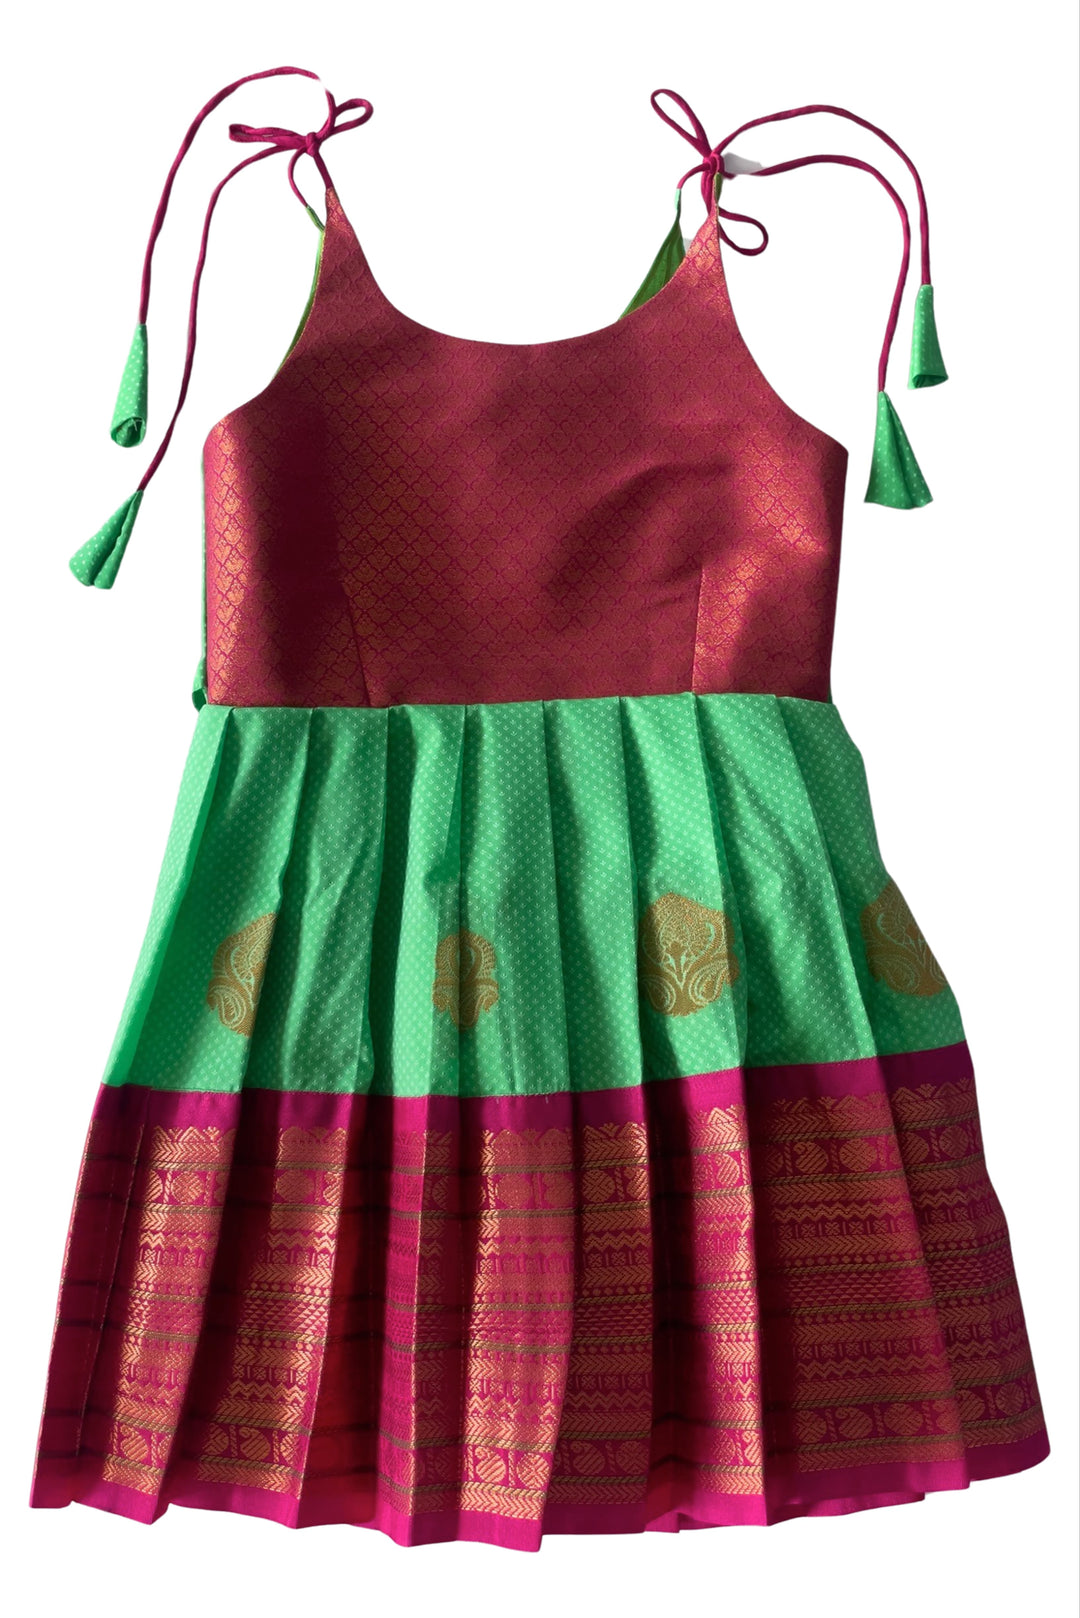 The Nesavu Tie Up Frock Festive Maroon and Emerald Green Silk Tieup frock with Elegant Embroidery Nesavu 14 (6M) / Green / Style 1 T309A-14 Girls' Maroon and Green Embroidered Silk Tieup Frock | The Nesavu